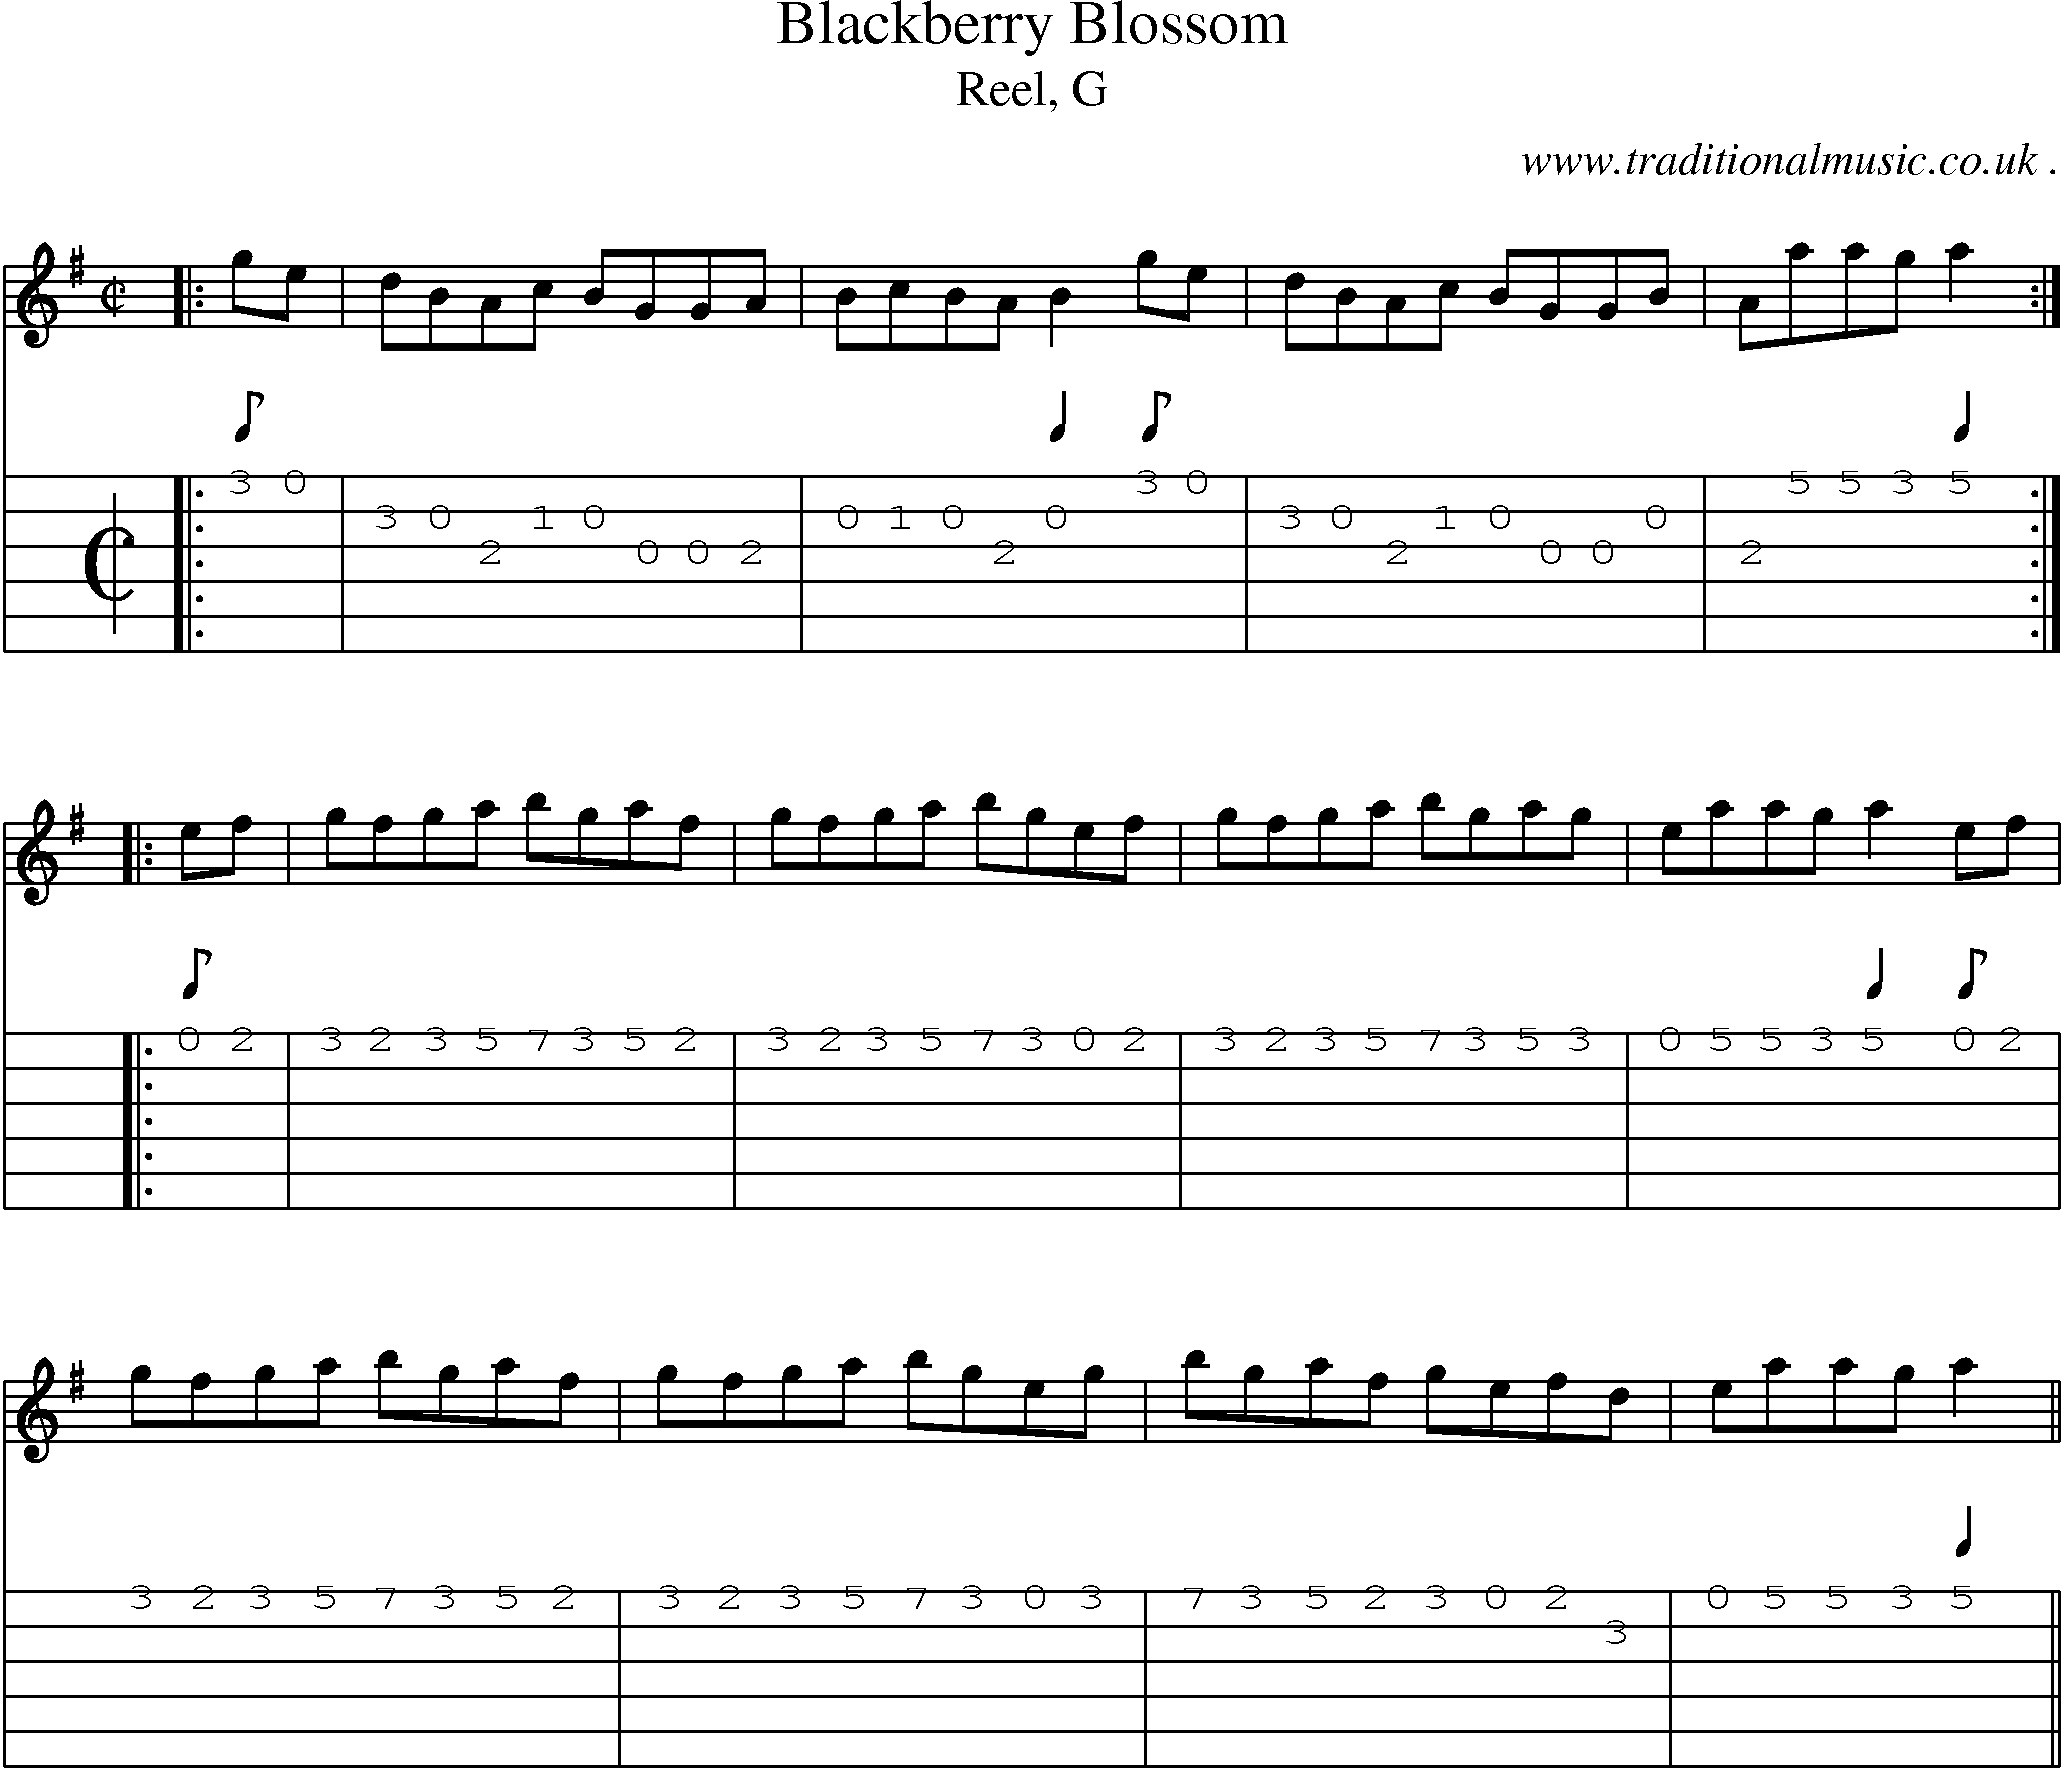 Sheet-music  score, Chords and Guitar Tabs for Blackberry Blossom